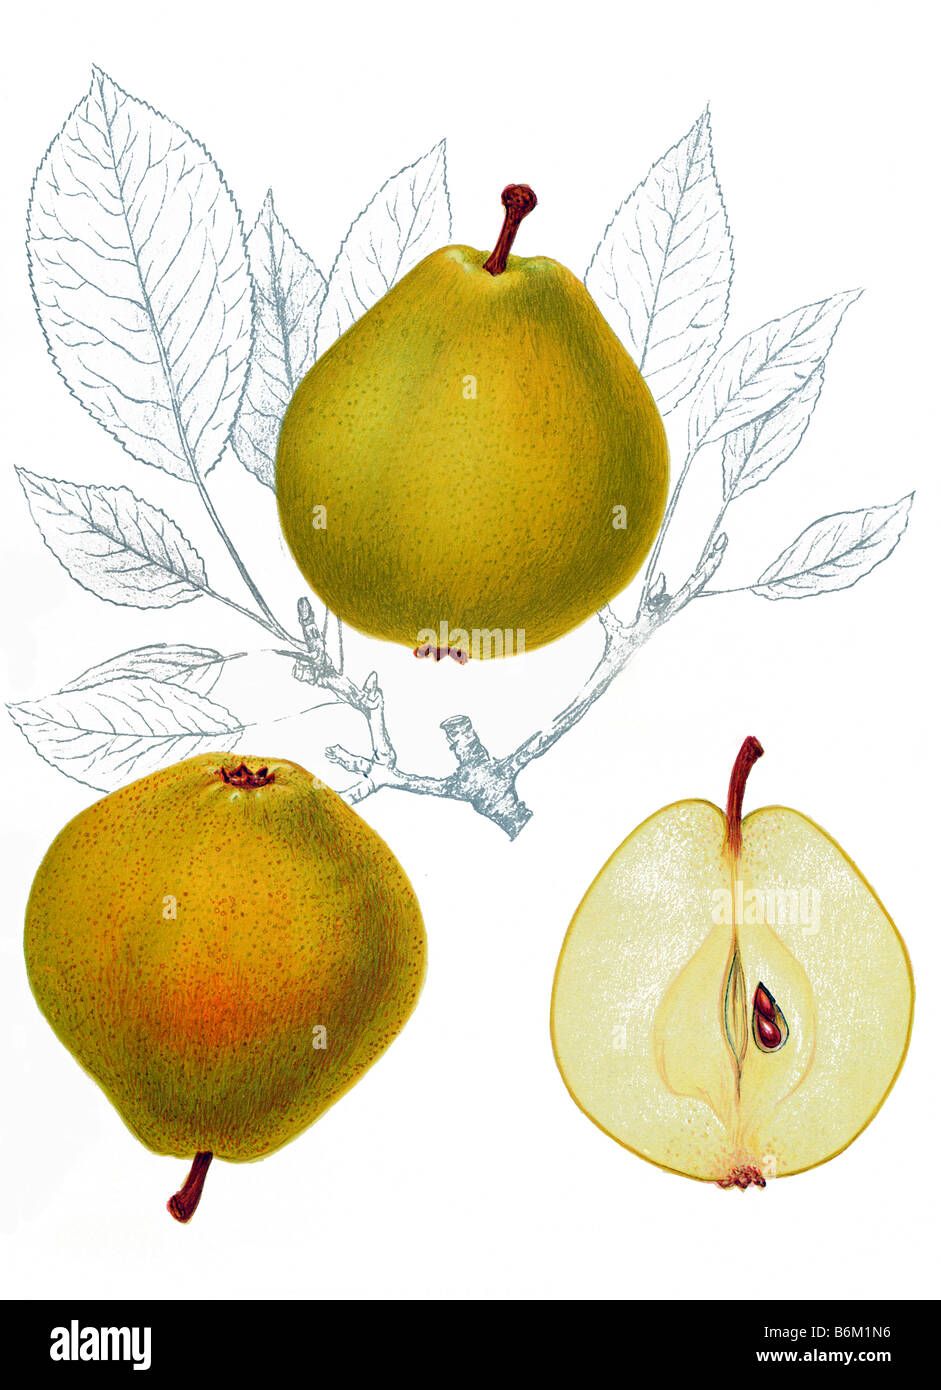 illustration of a pear and a pear half Stock Photo